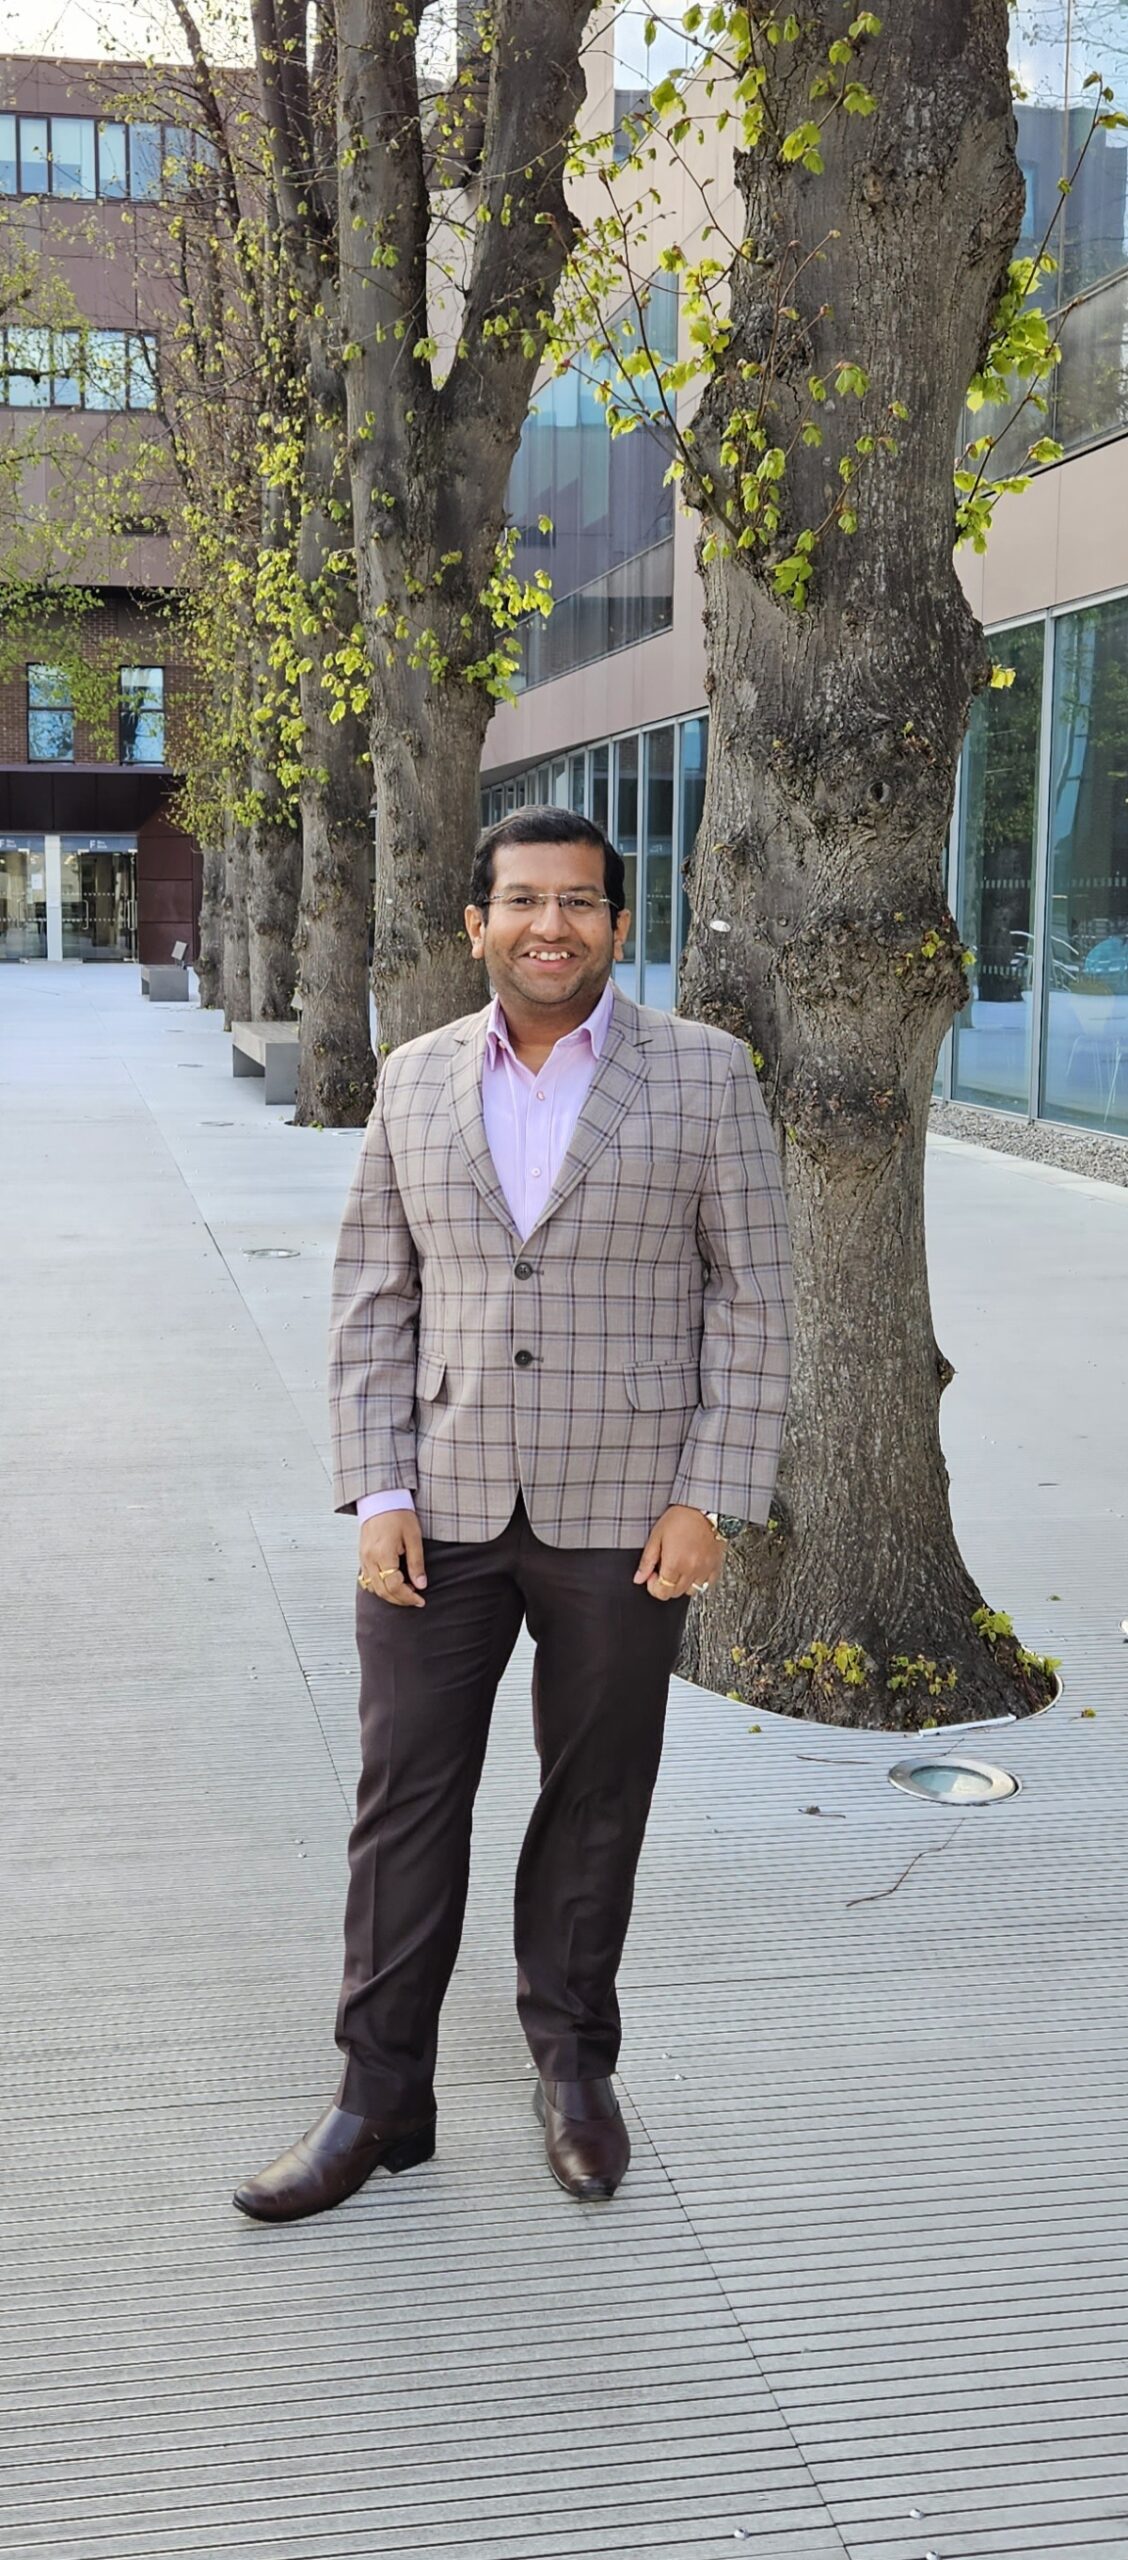 Arnav Bhattacharya standing in a plaza with trees